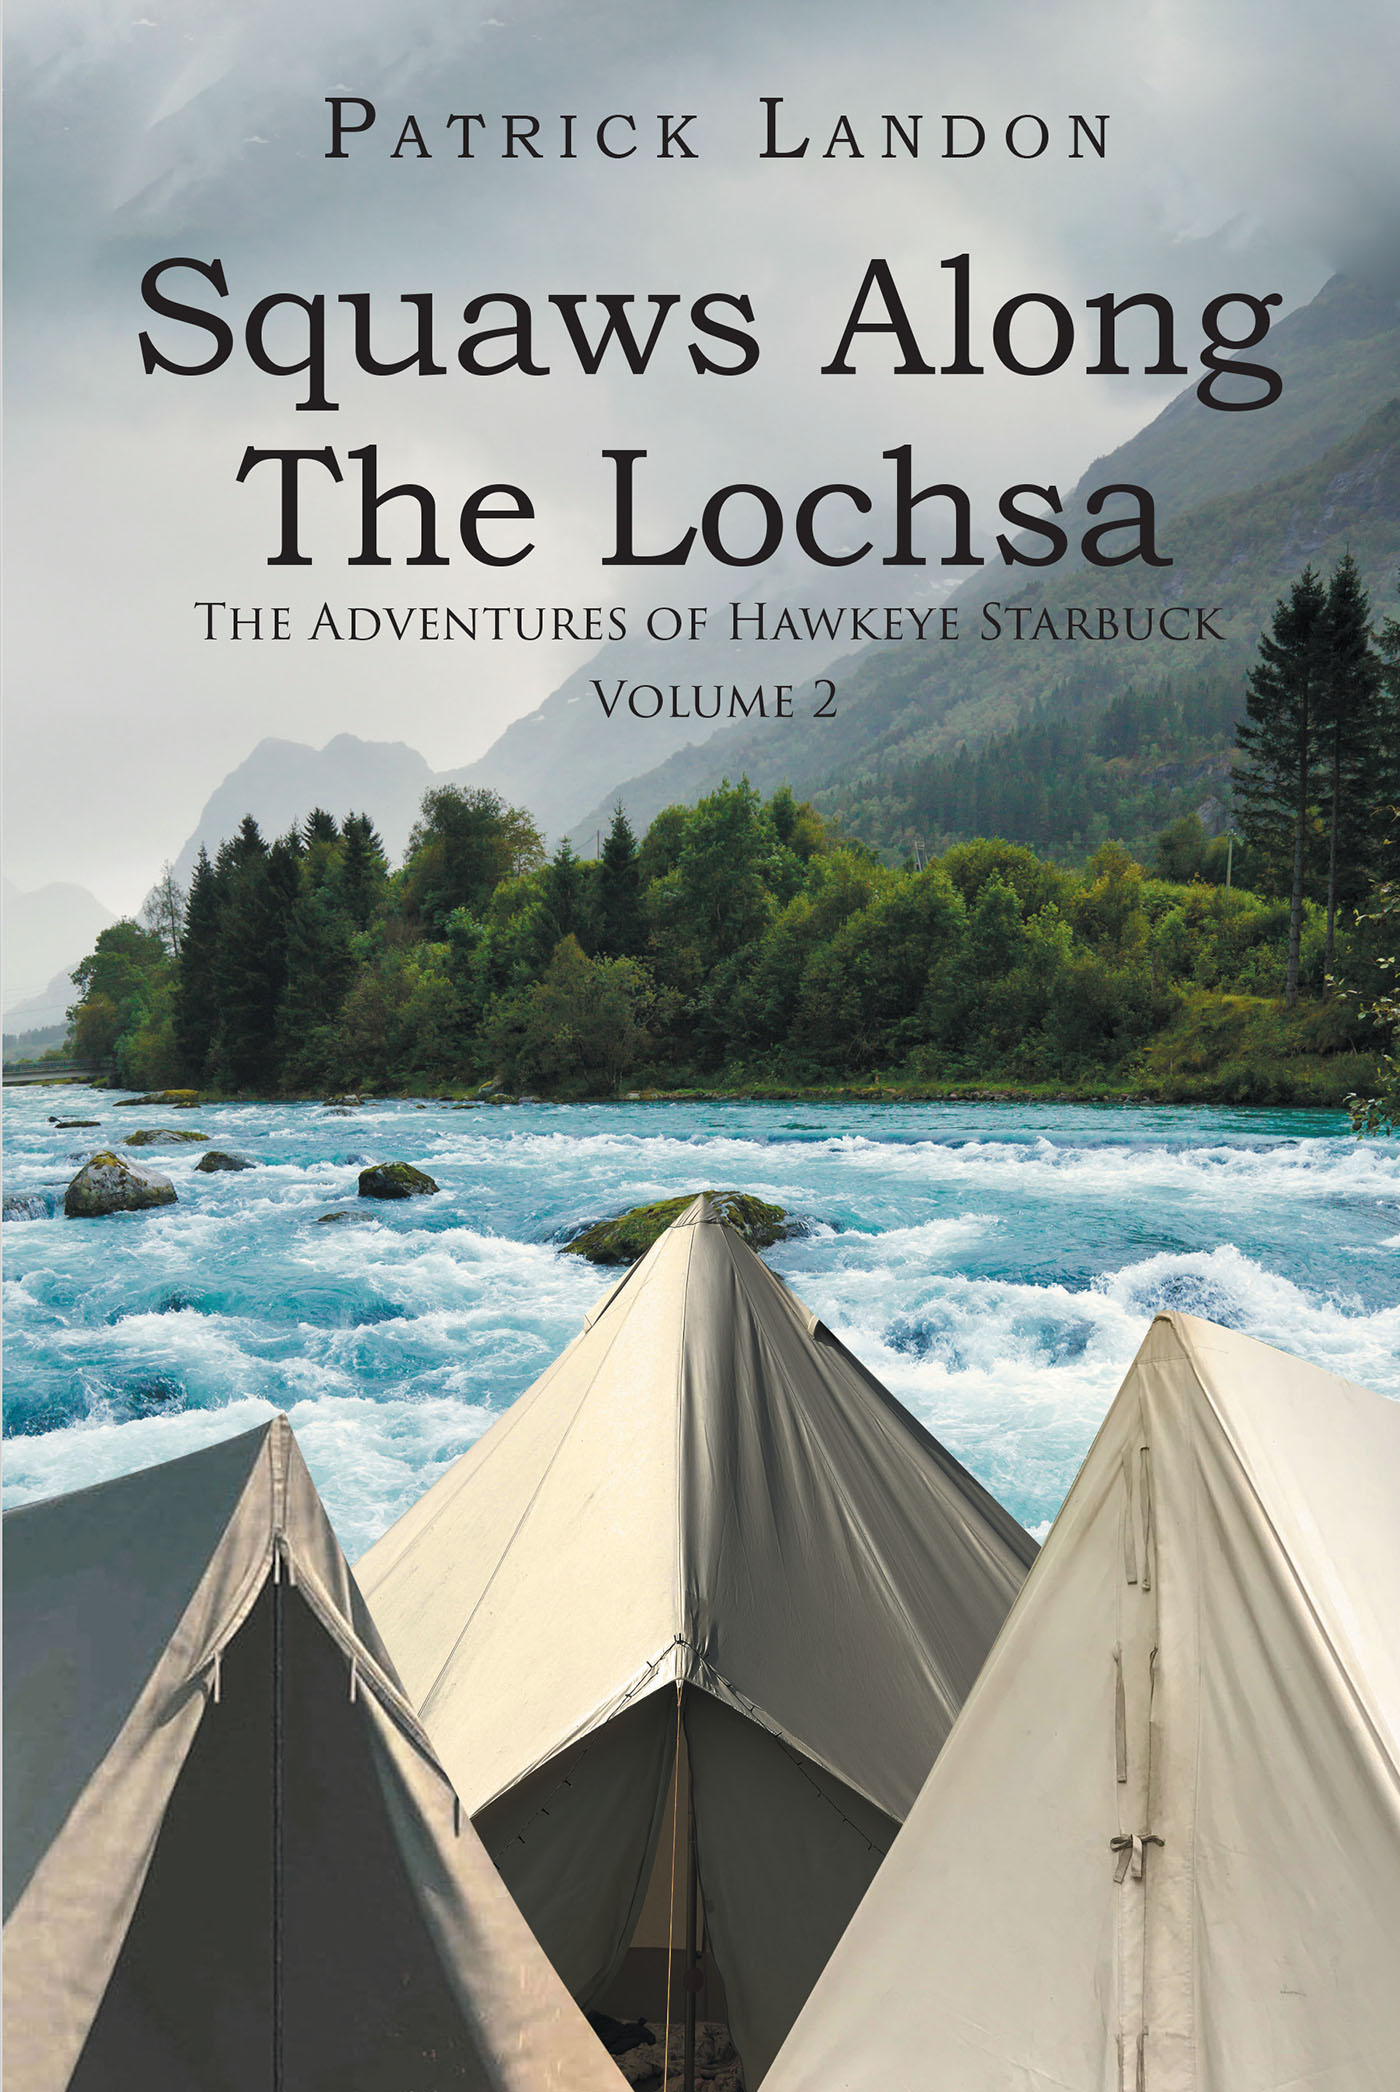 Patrick Landon’s New Book, “Squaws Along The Lochsa: The Adventures of Hawkeye Starbuck,” is an Exciting Western Novel Following a Headstrong Cowboy on a Rescue Mission